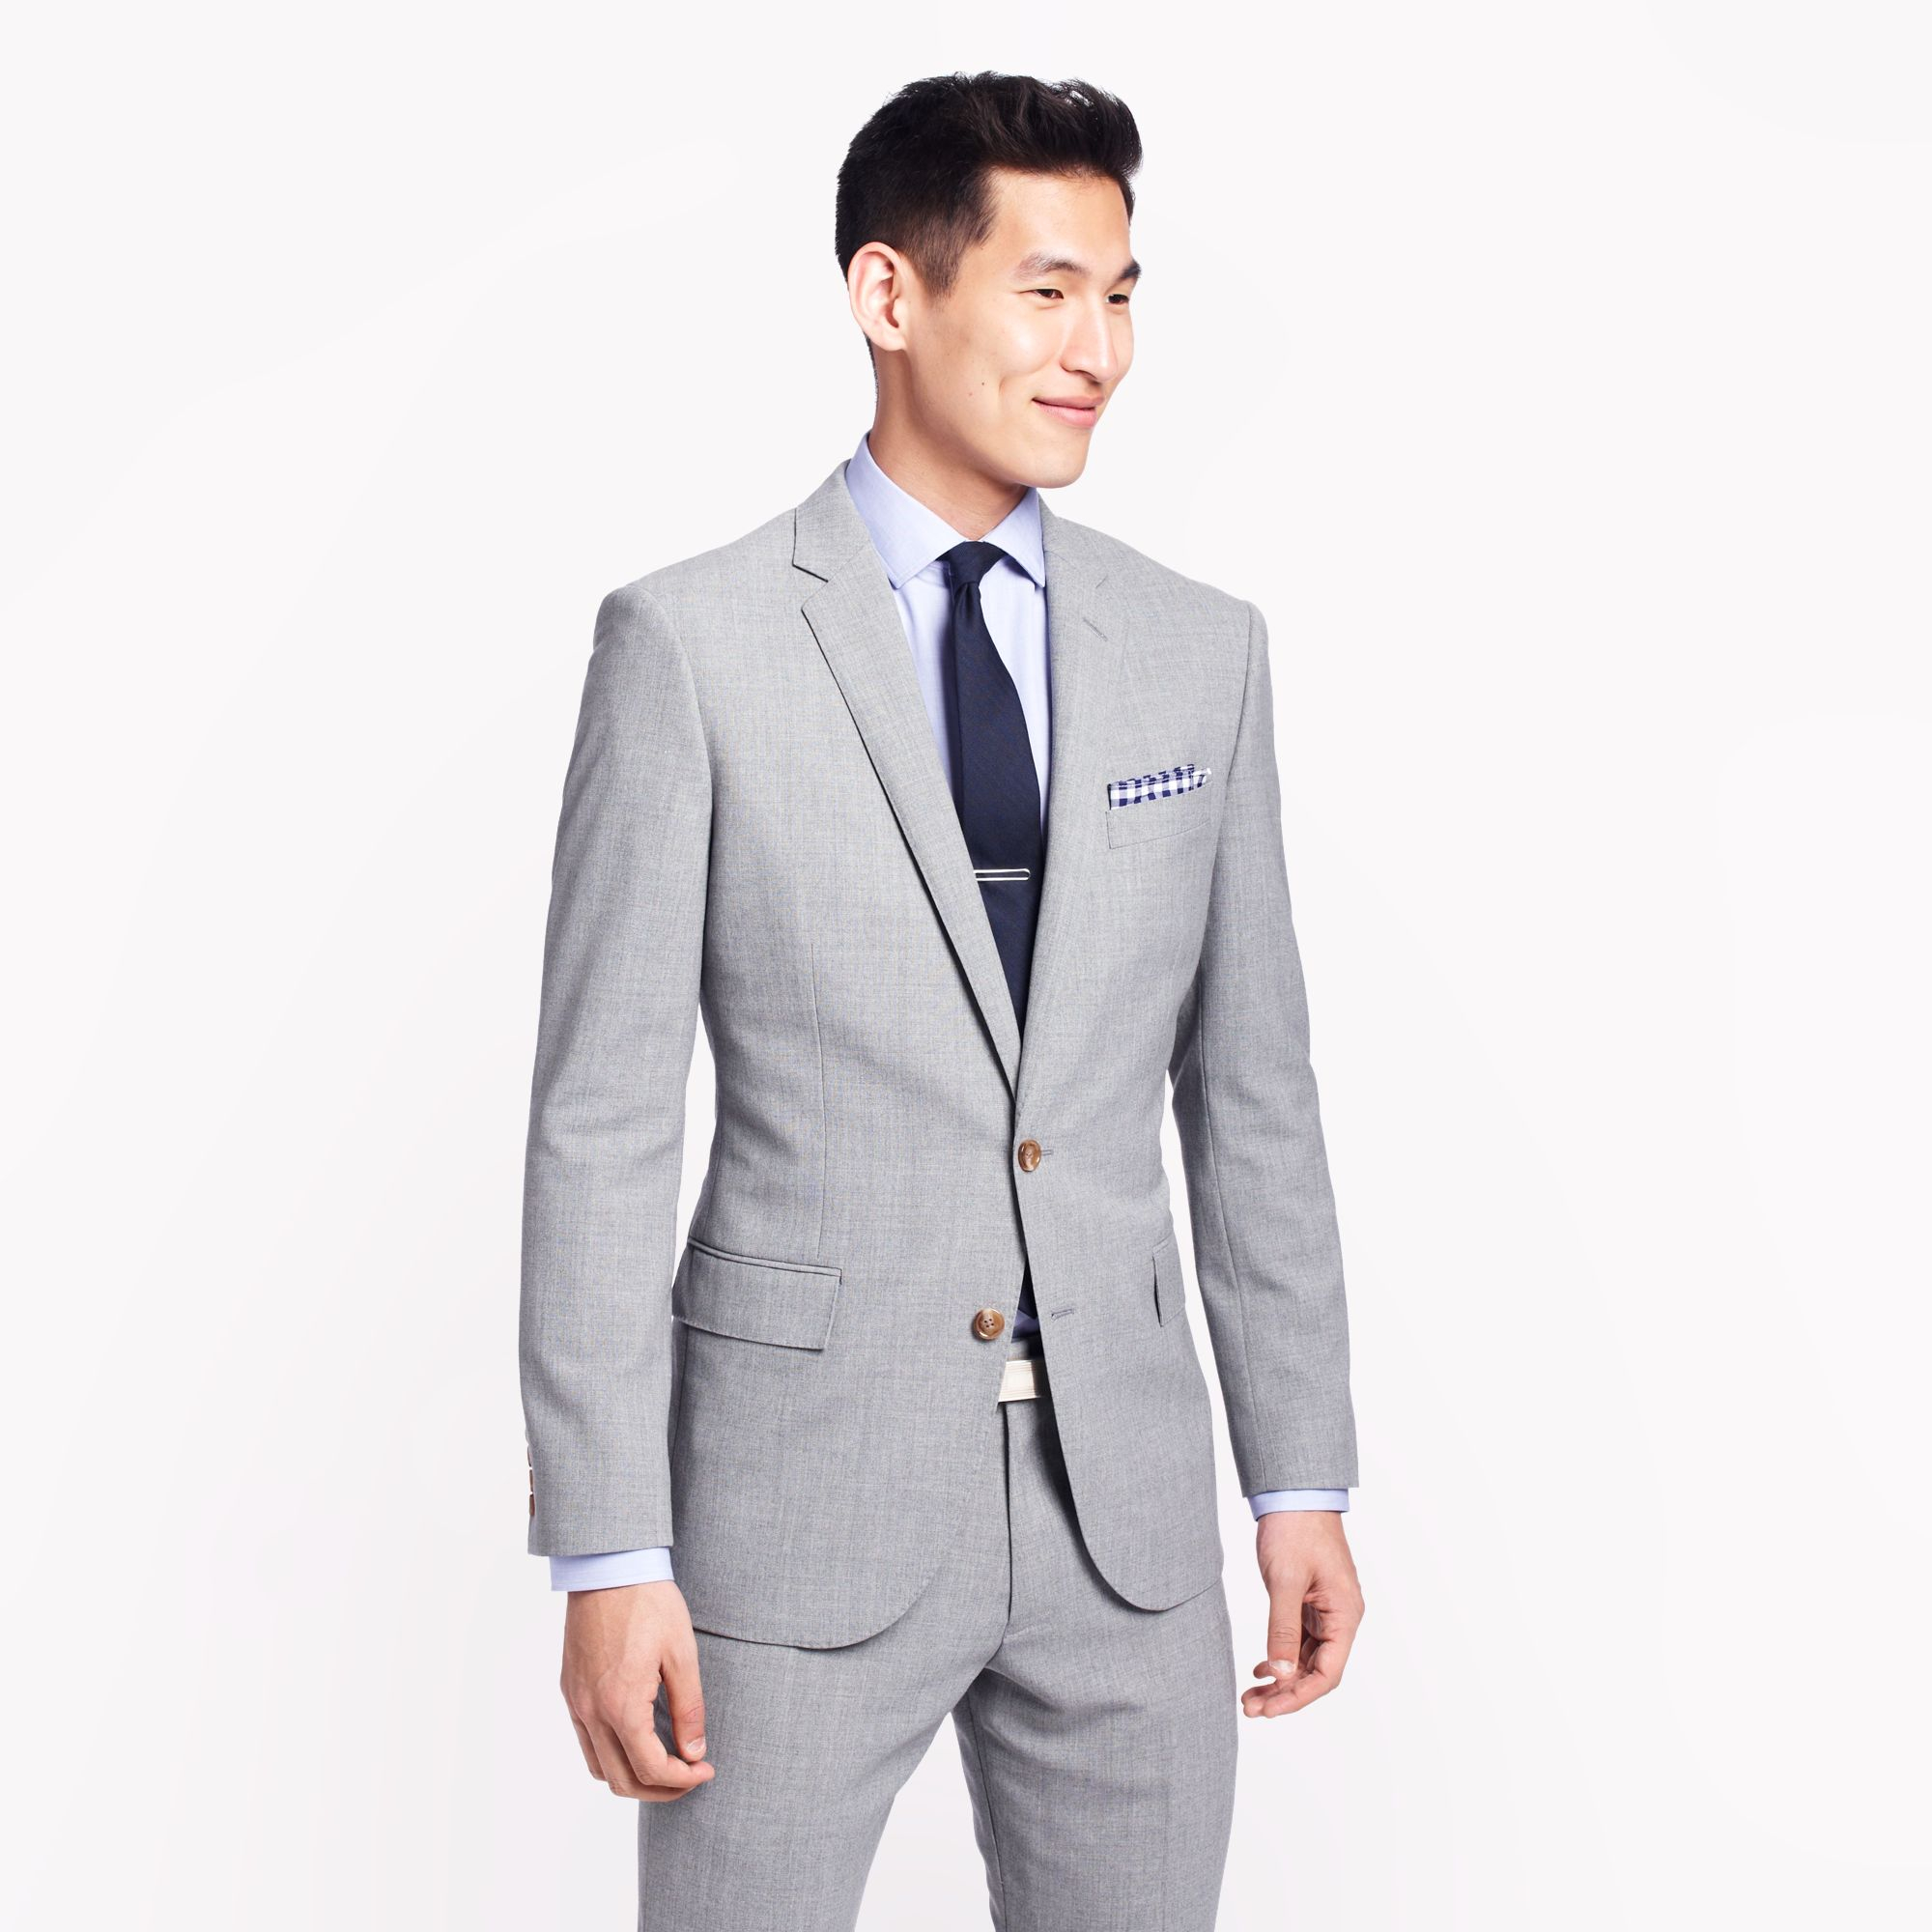 Lyst - J.Crew Ludlow Suit Jacket with Double Vent in Light Charcoal ...